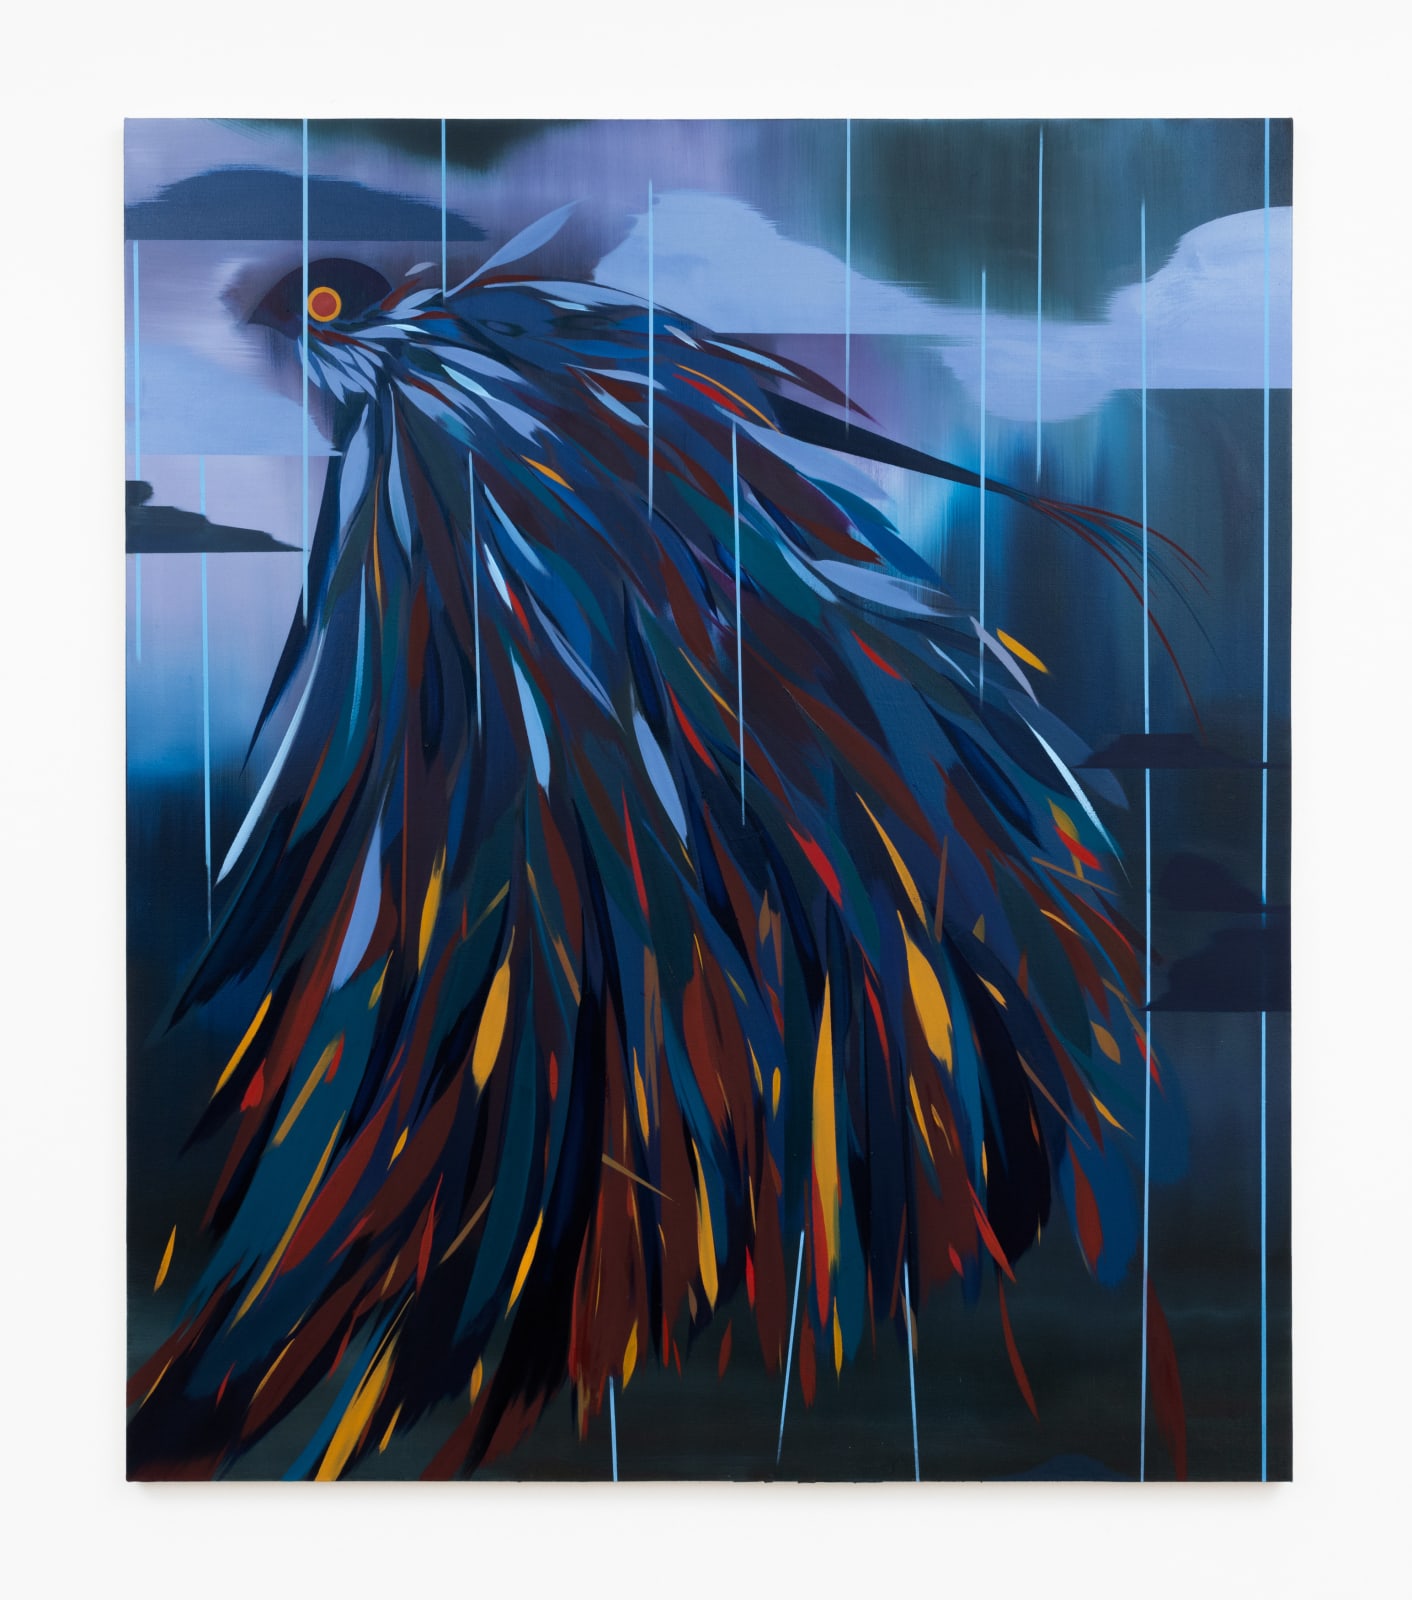 Painting featuring a bird figure with heavy wings, struggling to fly in a dark, gloomy rainy day.